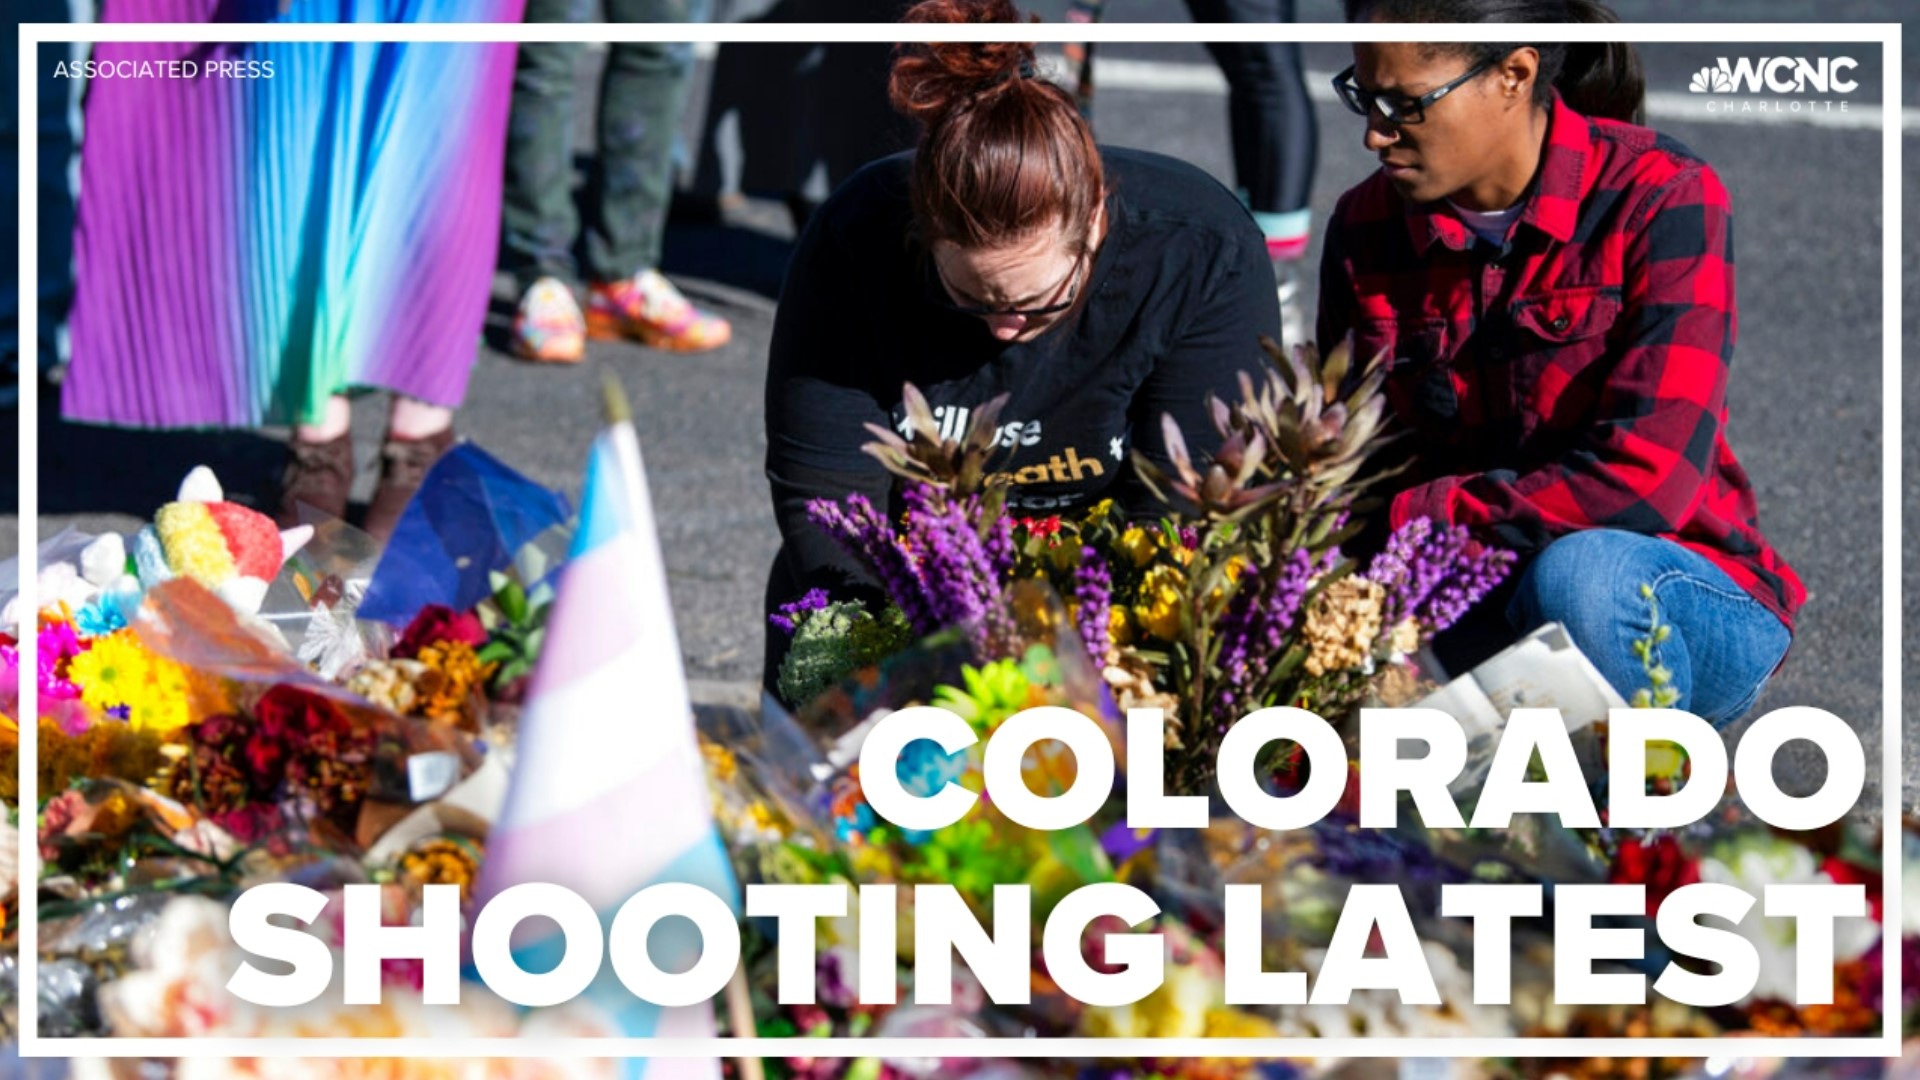 Five people were killed and 25 others were injured when a gunman opened fire at an LGBTQ+ club in Colorado Springs, Colorado, over the weekend, police said.